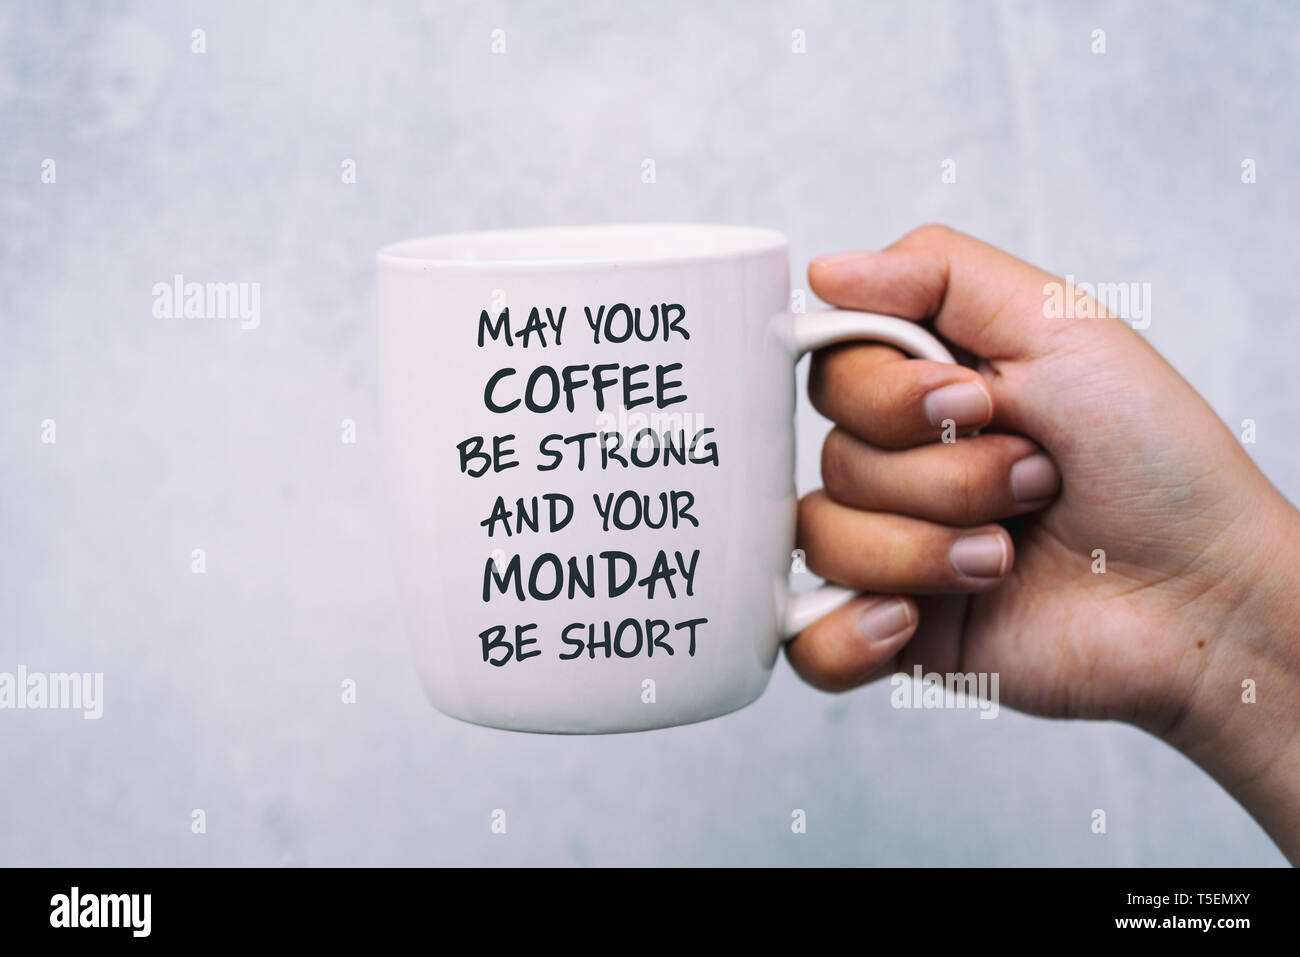 https://c8.alamy.com/comp/T5EMXY/inspirational-quotes-coffee-and-monday-greeting-may-your-coffee-be-strong-and-your-monday-be-short-T5EMXY.jpg